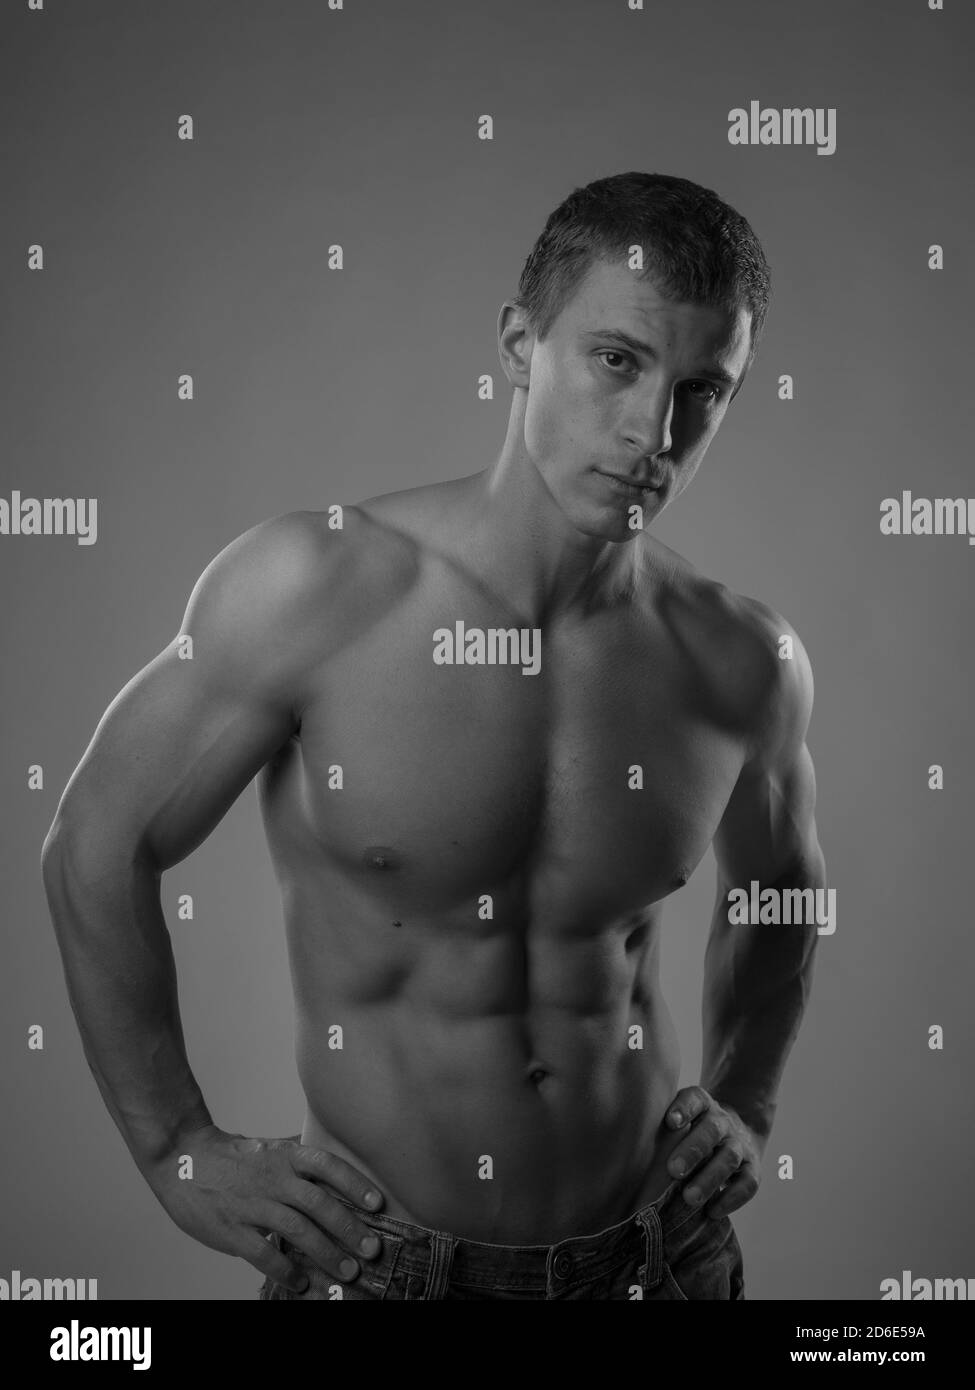 Muscular and fit young man posing shirtless Stock Photo - Alamy